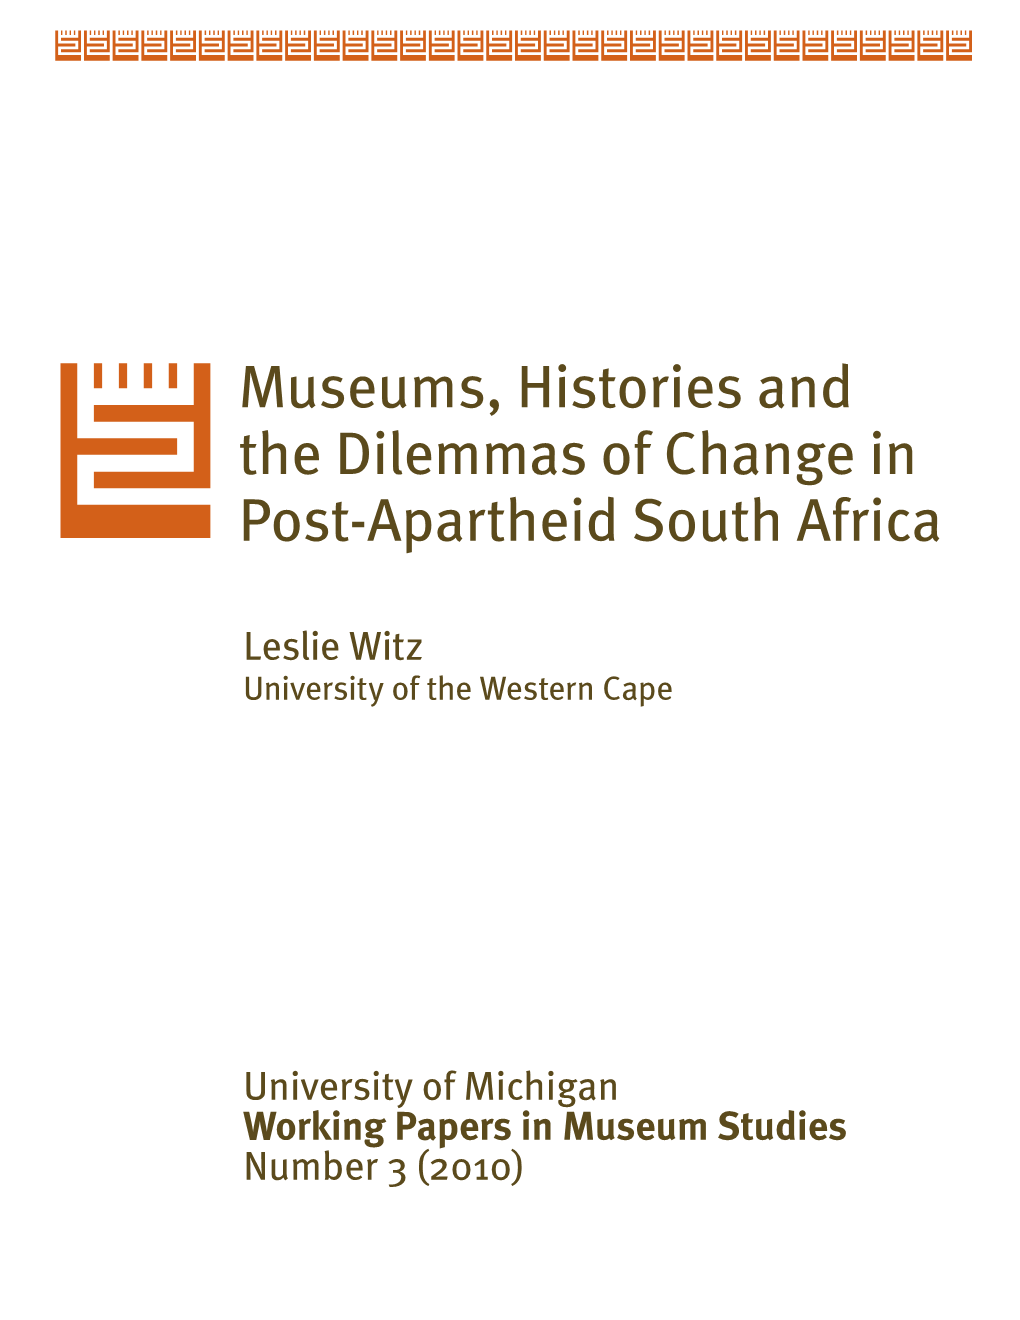 Museums, Histories and the Dilemmas of Change in Post-Apartheid South Africa